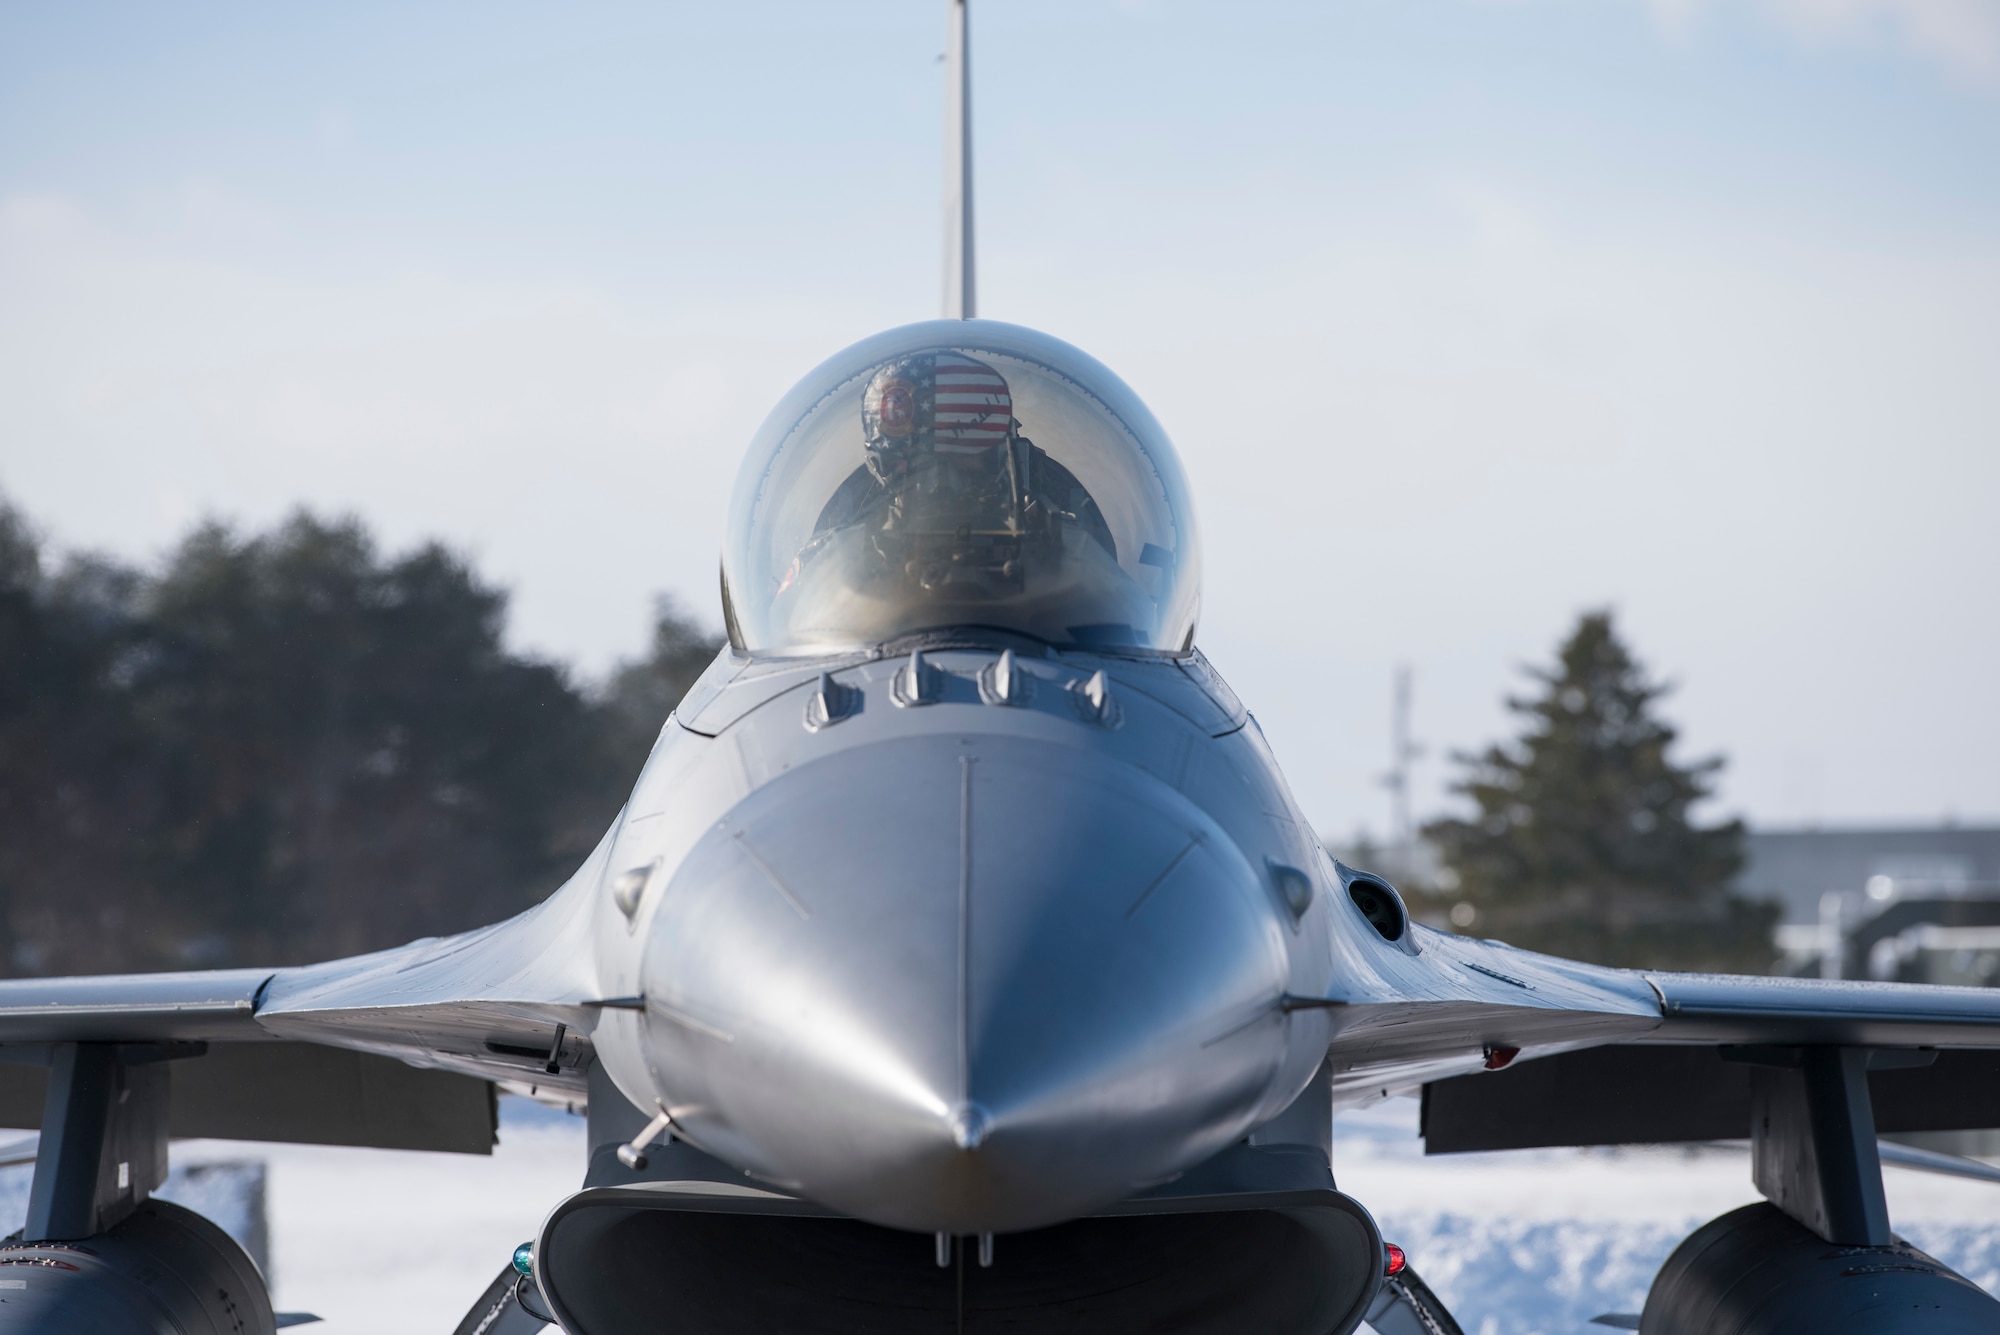 U.S. Air Force Col. Kristopher Struve, the 35th Fighter Wing commander, strap into an F-16 Fighting Falcon at Misawa Air Base, Japan, Dec. 28, 1018. Struve is a seasoned F-16 Fighting Falcon pilot with more than 2,500 flying hours. He also commanded the 13th Fighter Squadron from June 2015 to July 2016 and led them in the opening days of operations reentering Iraq and into Syria as part of OPERATION INHERENT RESOLVE. (U.S. Air Force photo by Staff Sgt. B.A. Chase)